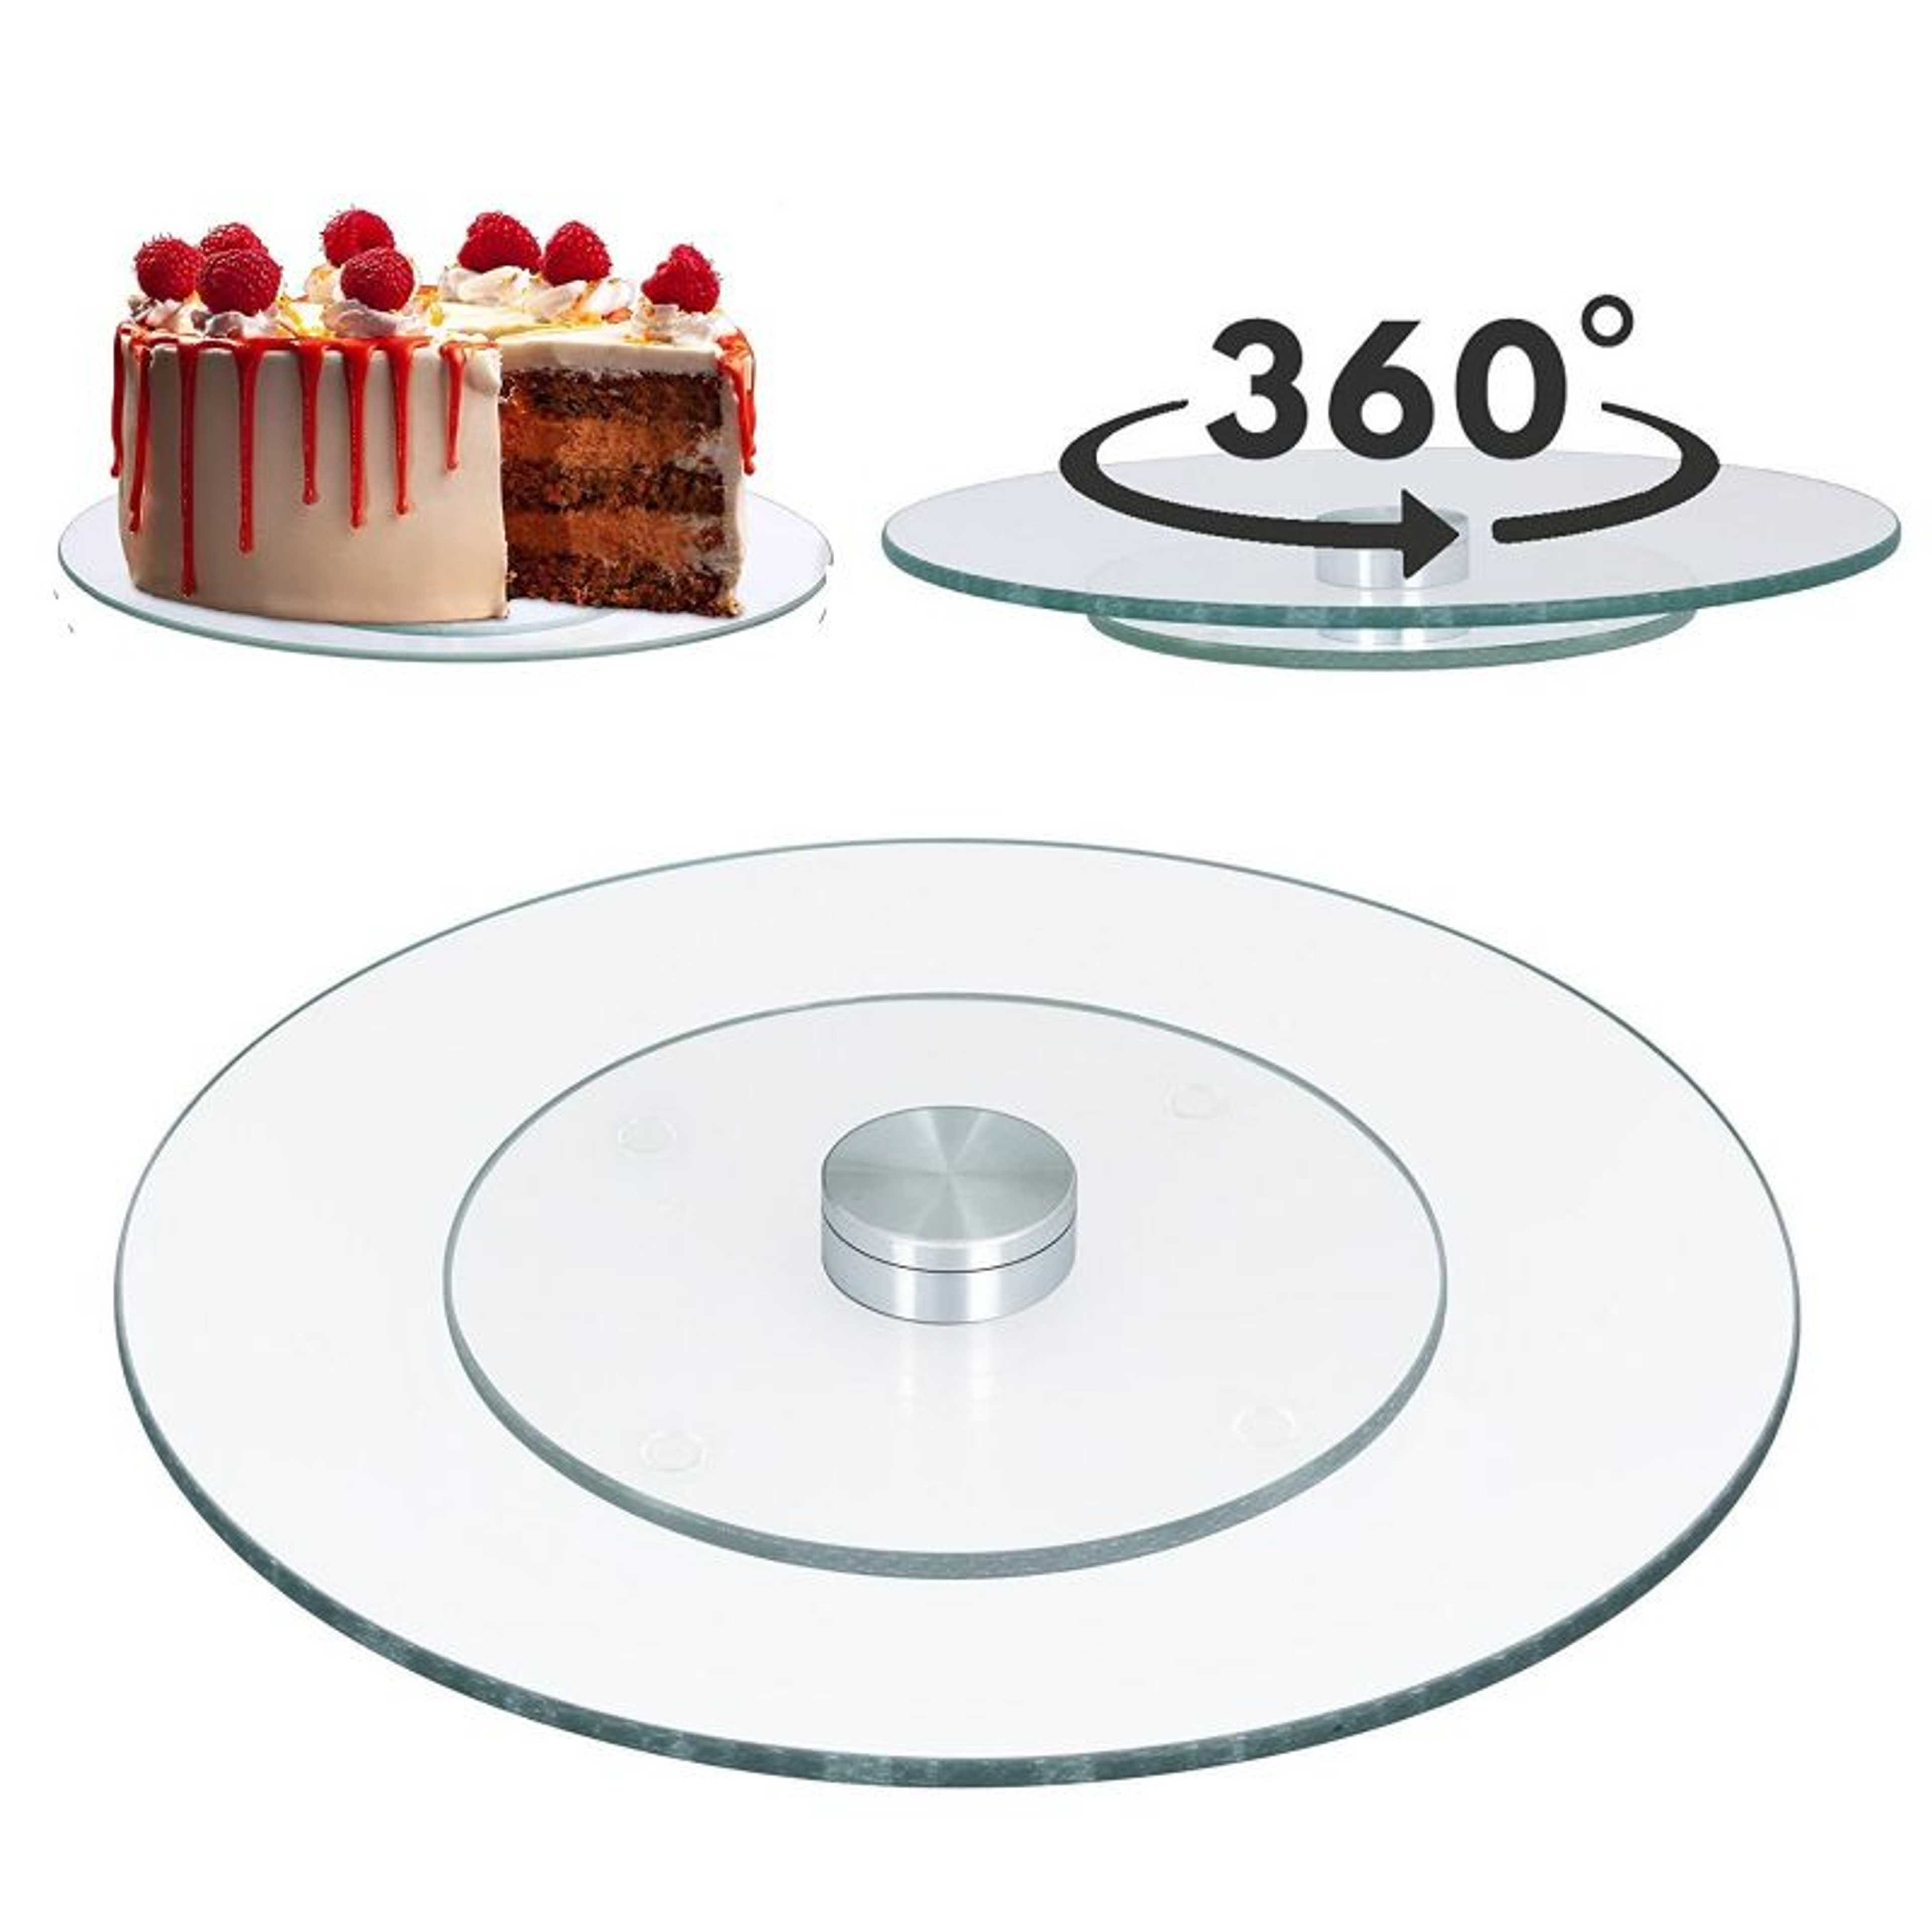 Multifunctional Round Turntable For Serving Cake/Fruits/Desserts & Decorating Cakes, DIY Baking Rotating Tray